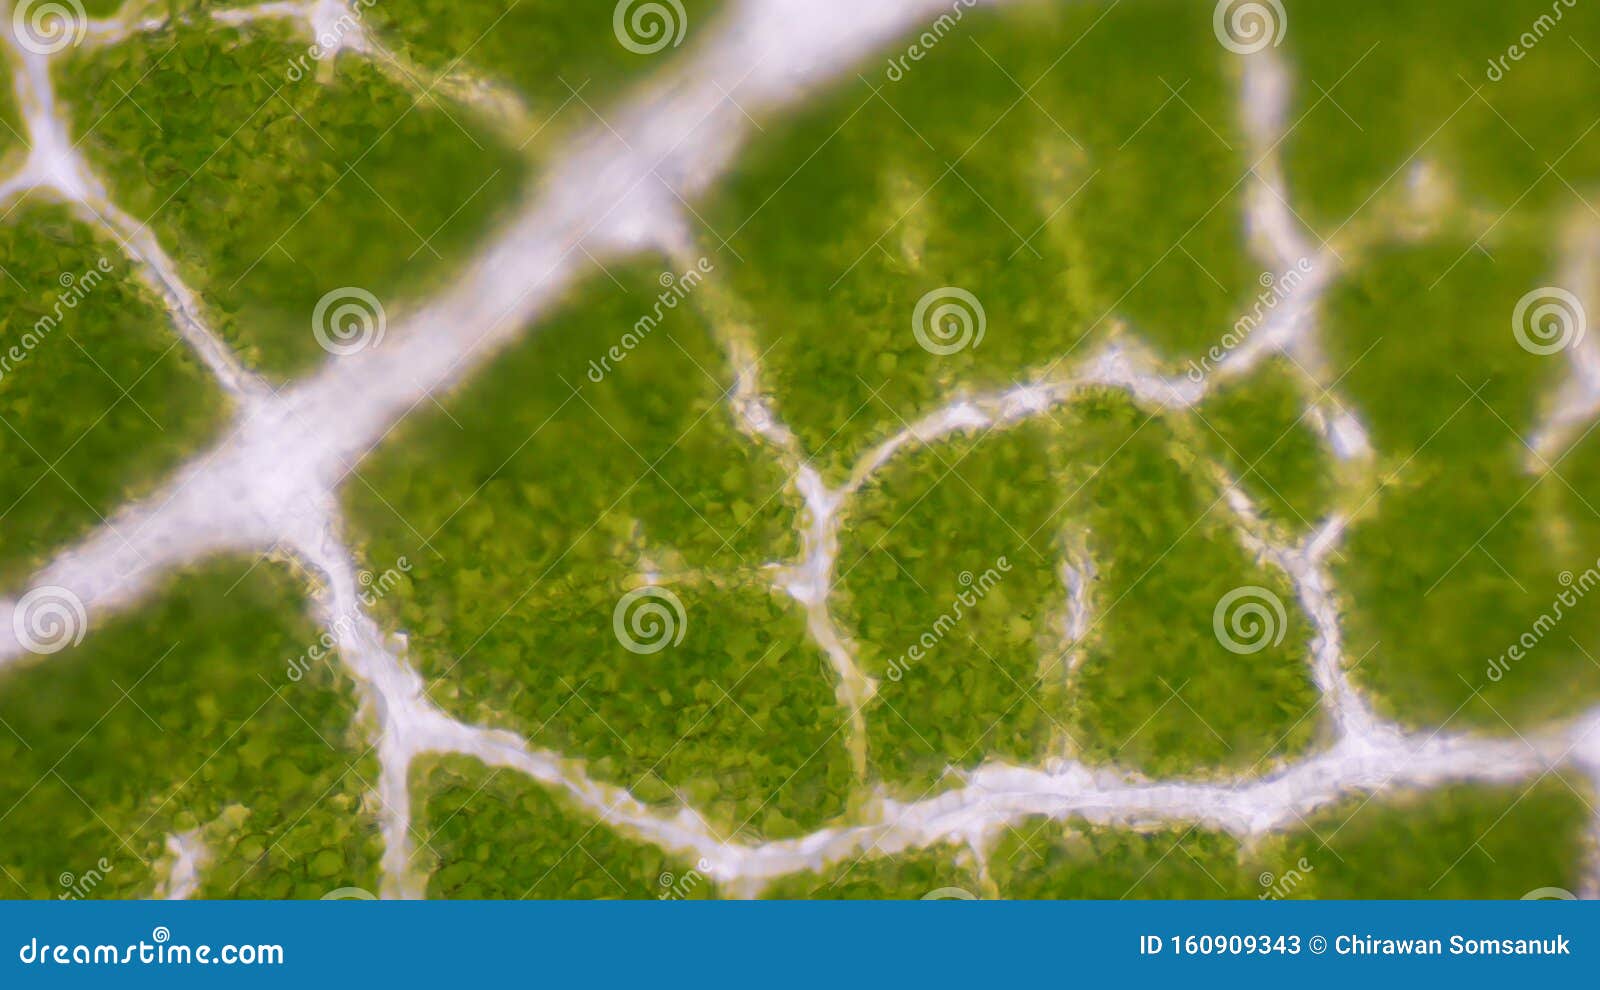 green leaf stoma cells science background